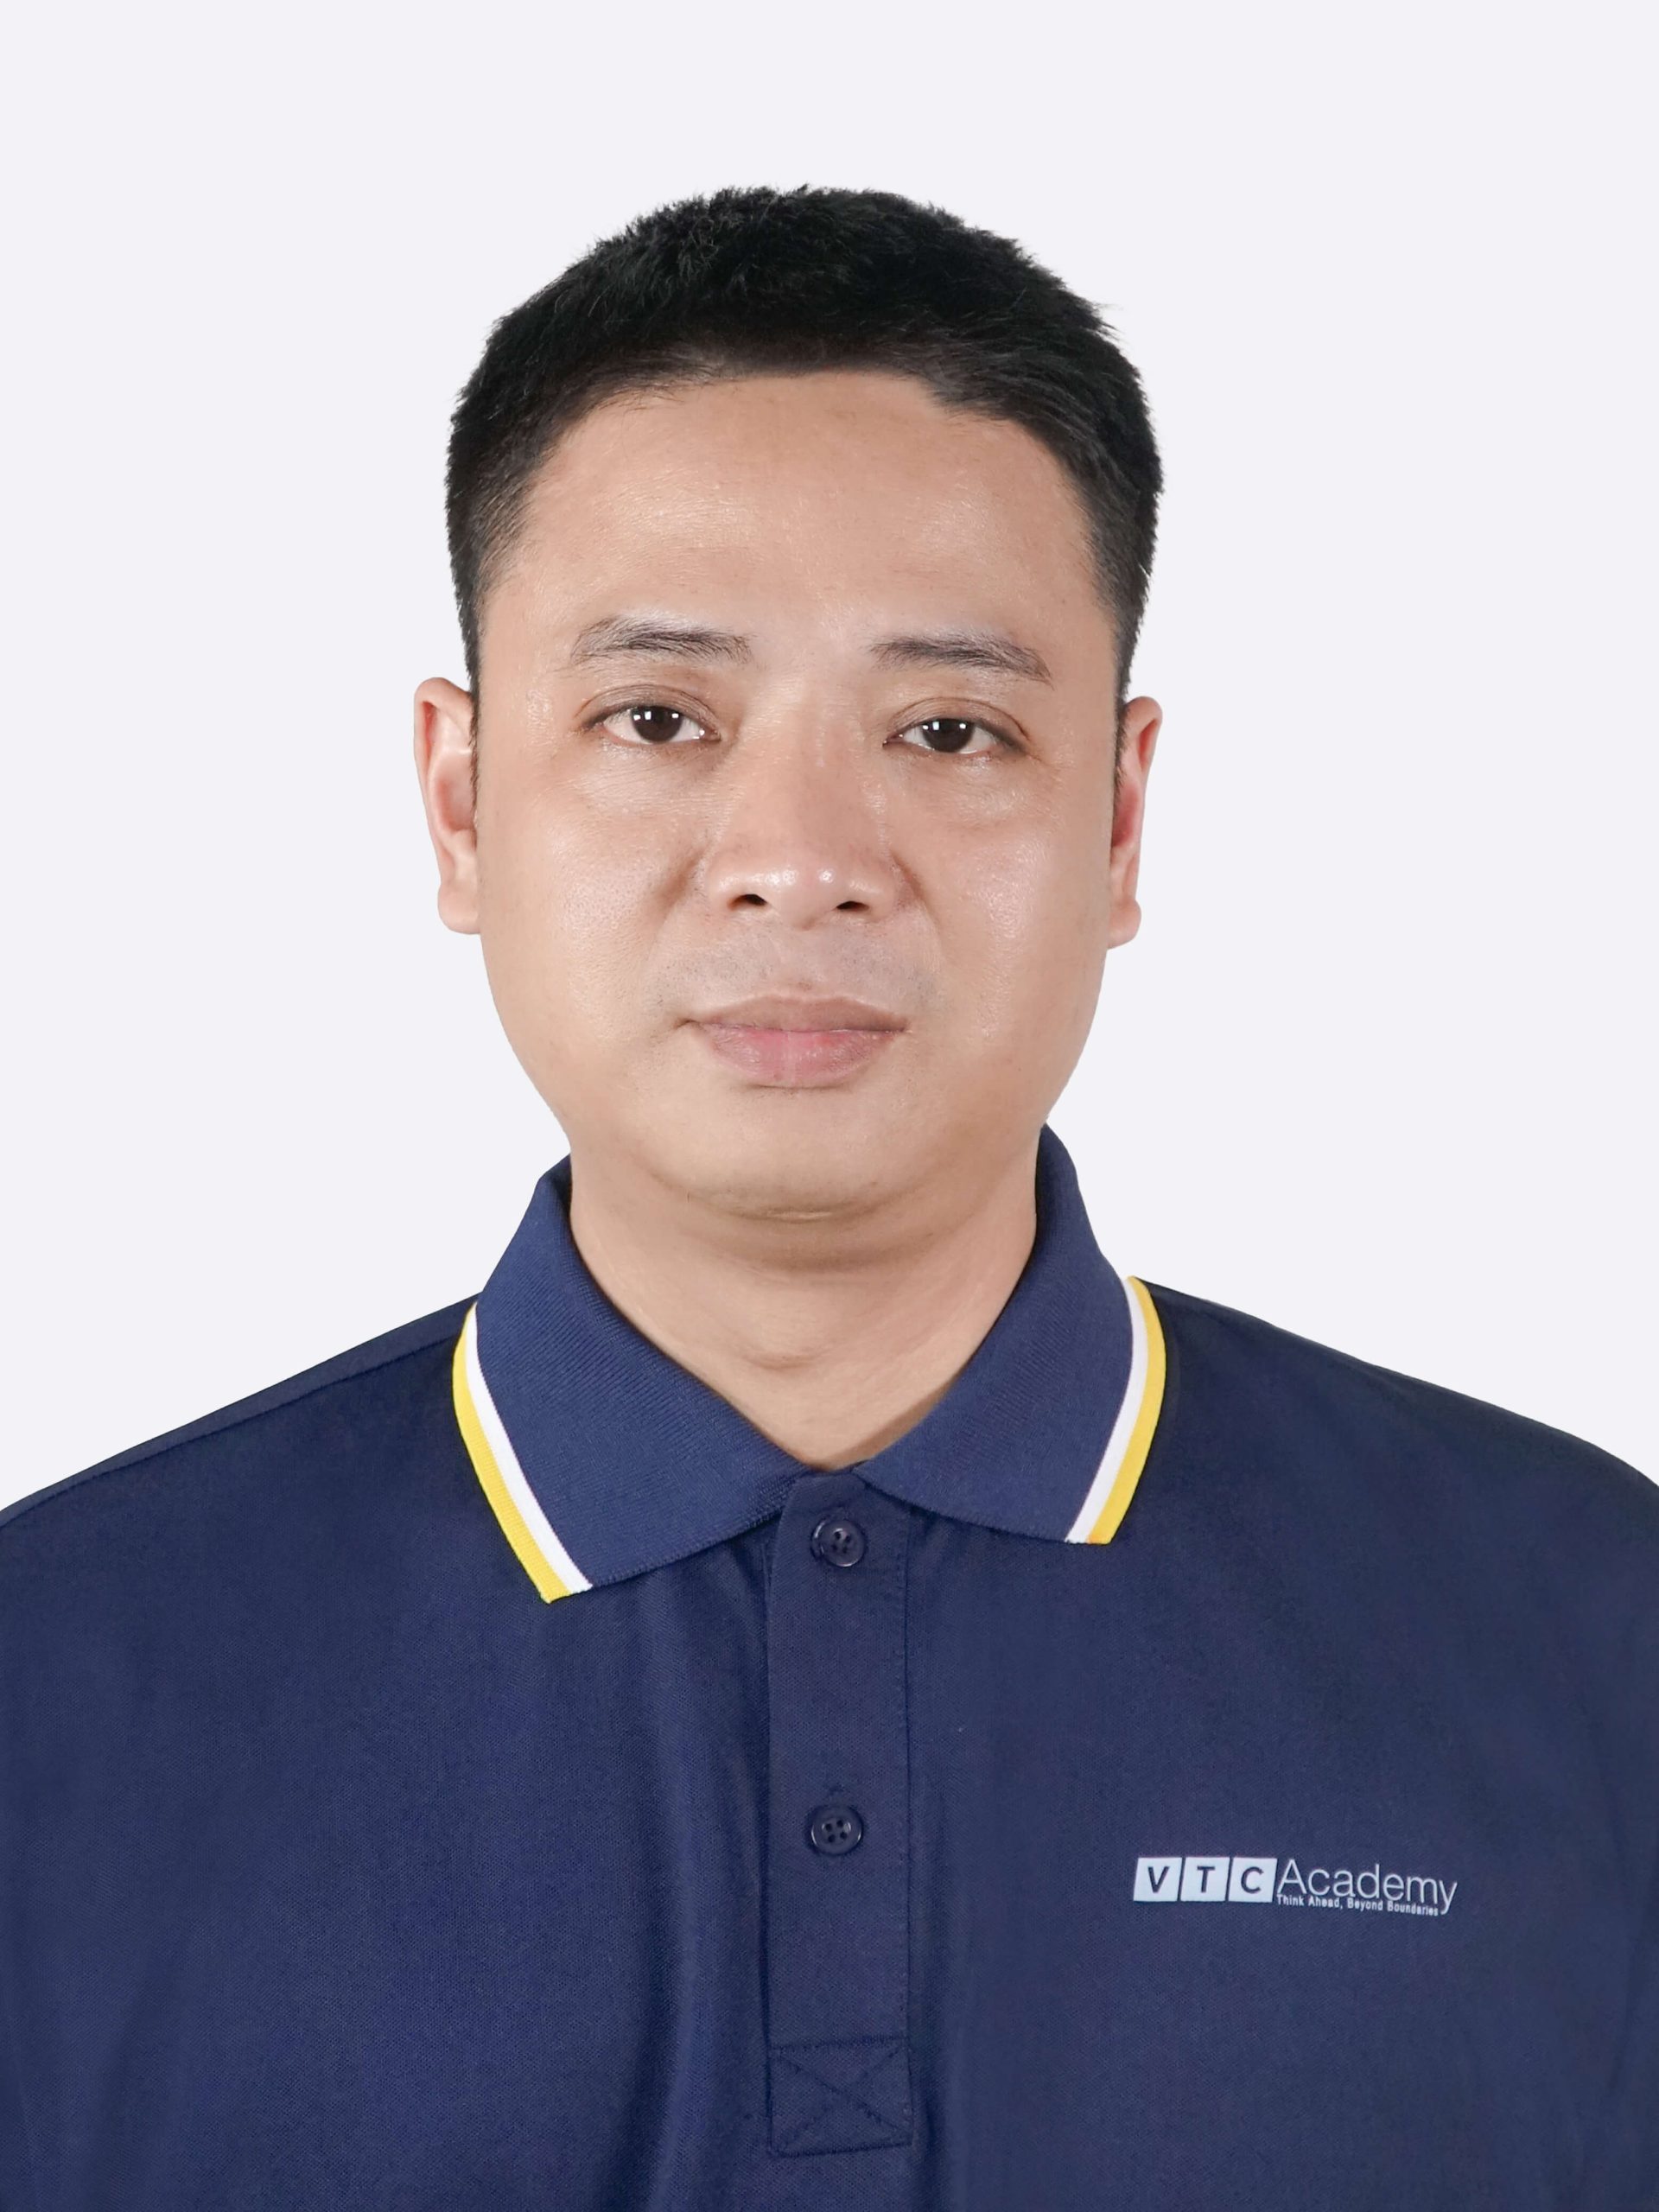 Mr. Nguyen Dinh Cuong